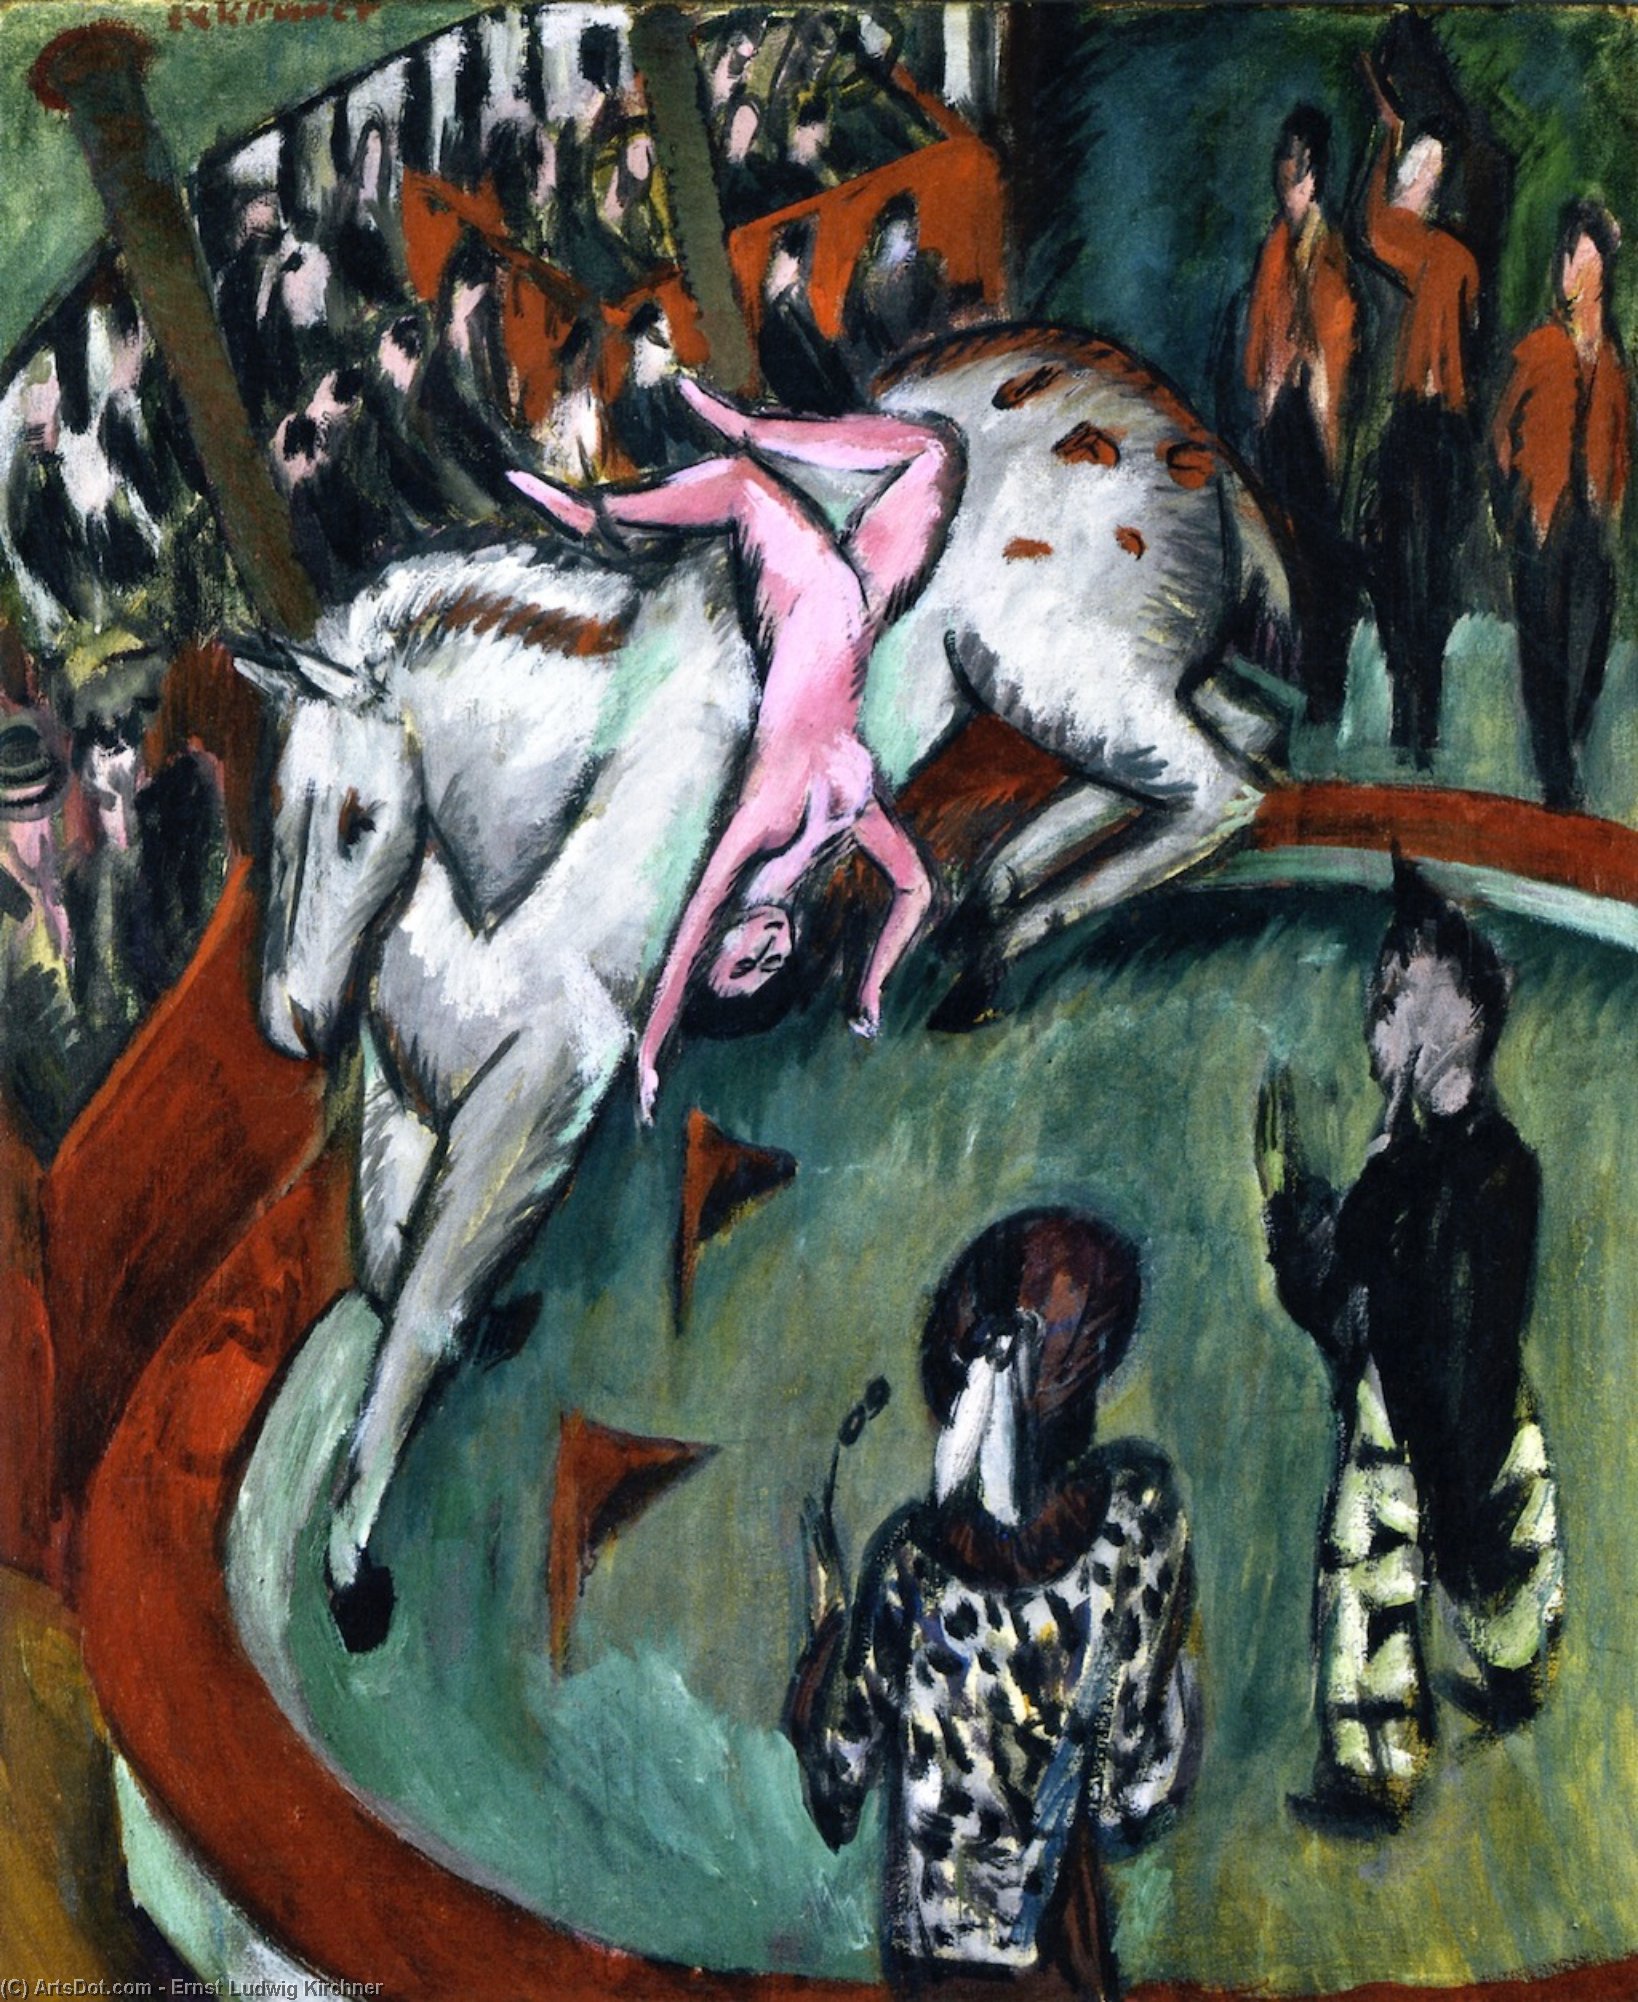 WikiOO.org - 백과 사전 - 회화, 삽화 Ernst Ludwig Kirchner - Circus (also known as Circus Rider)